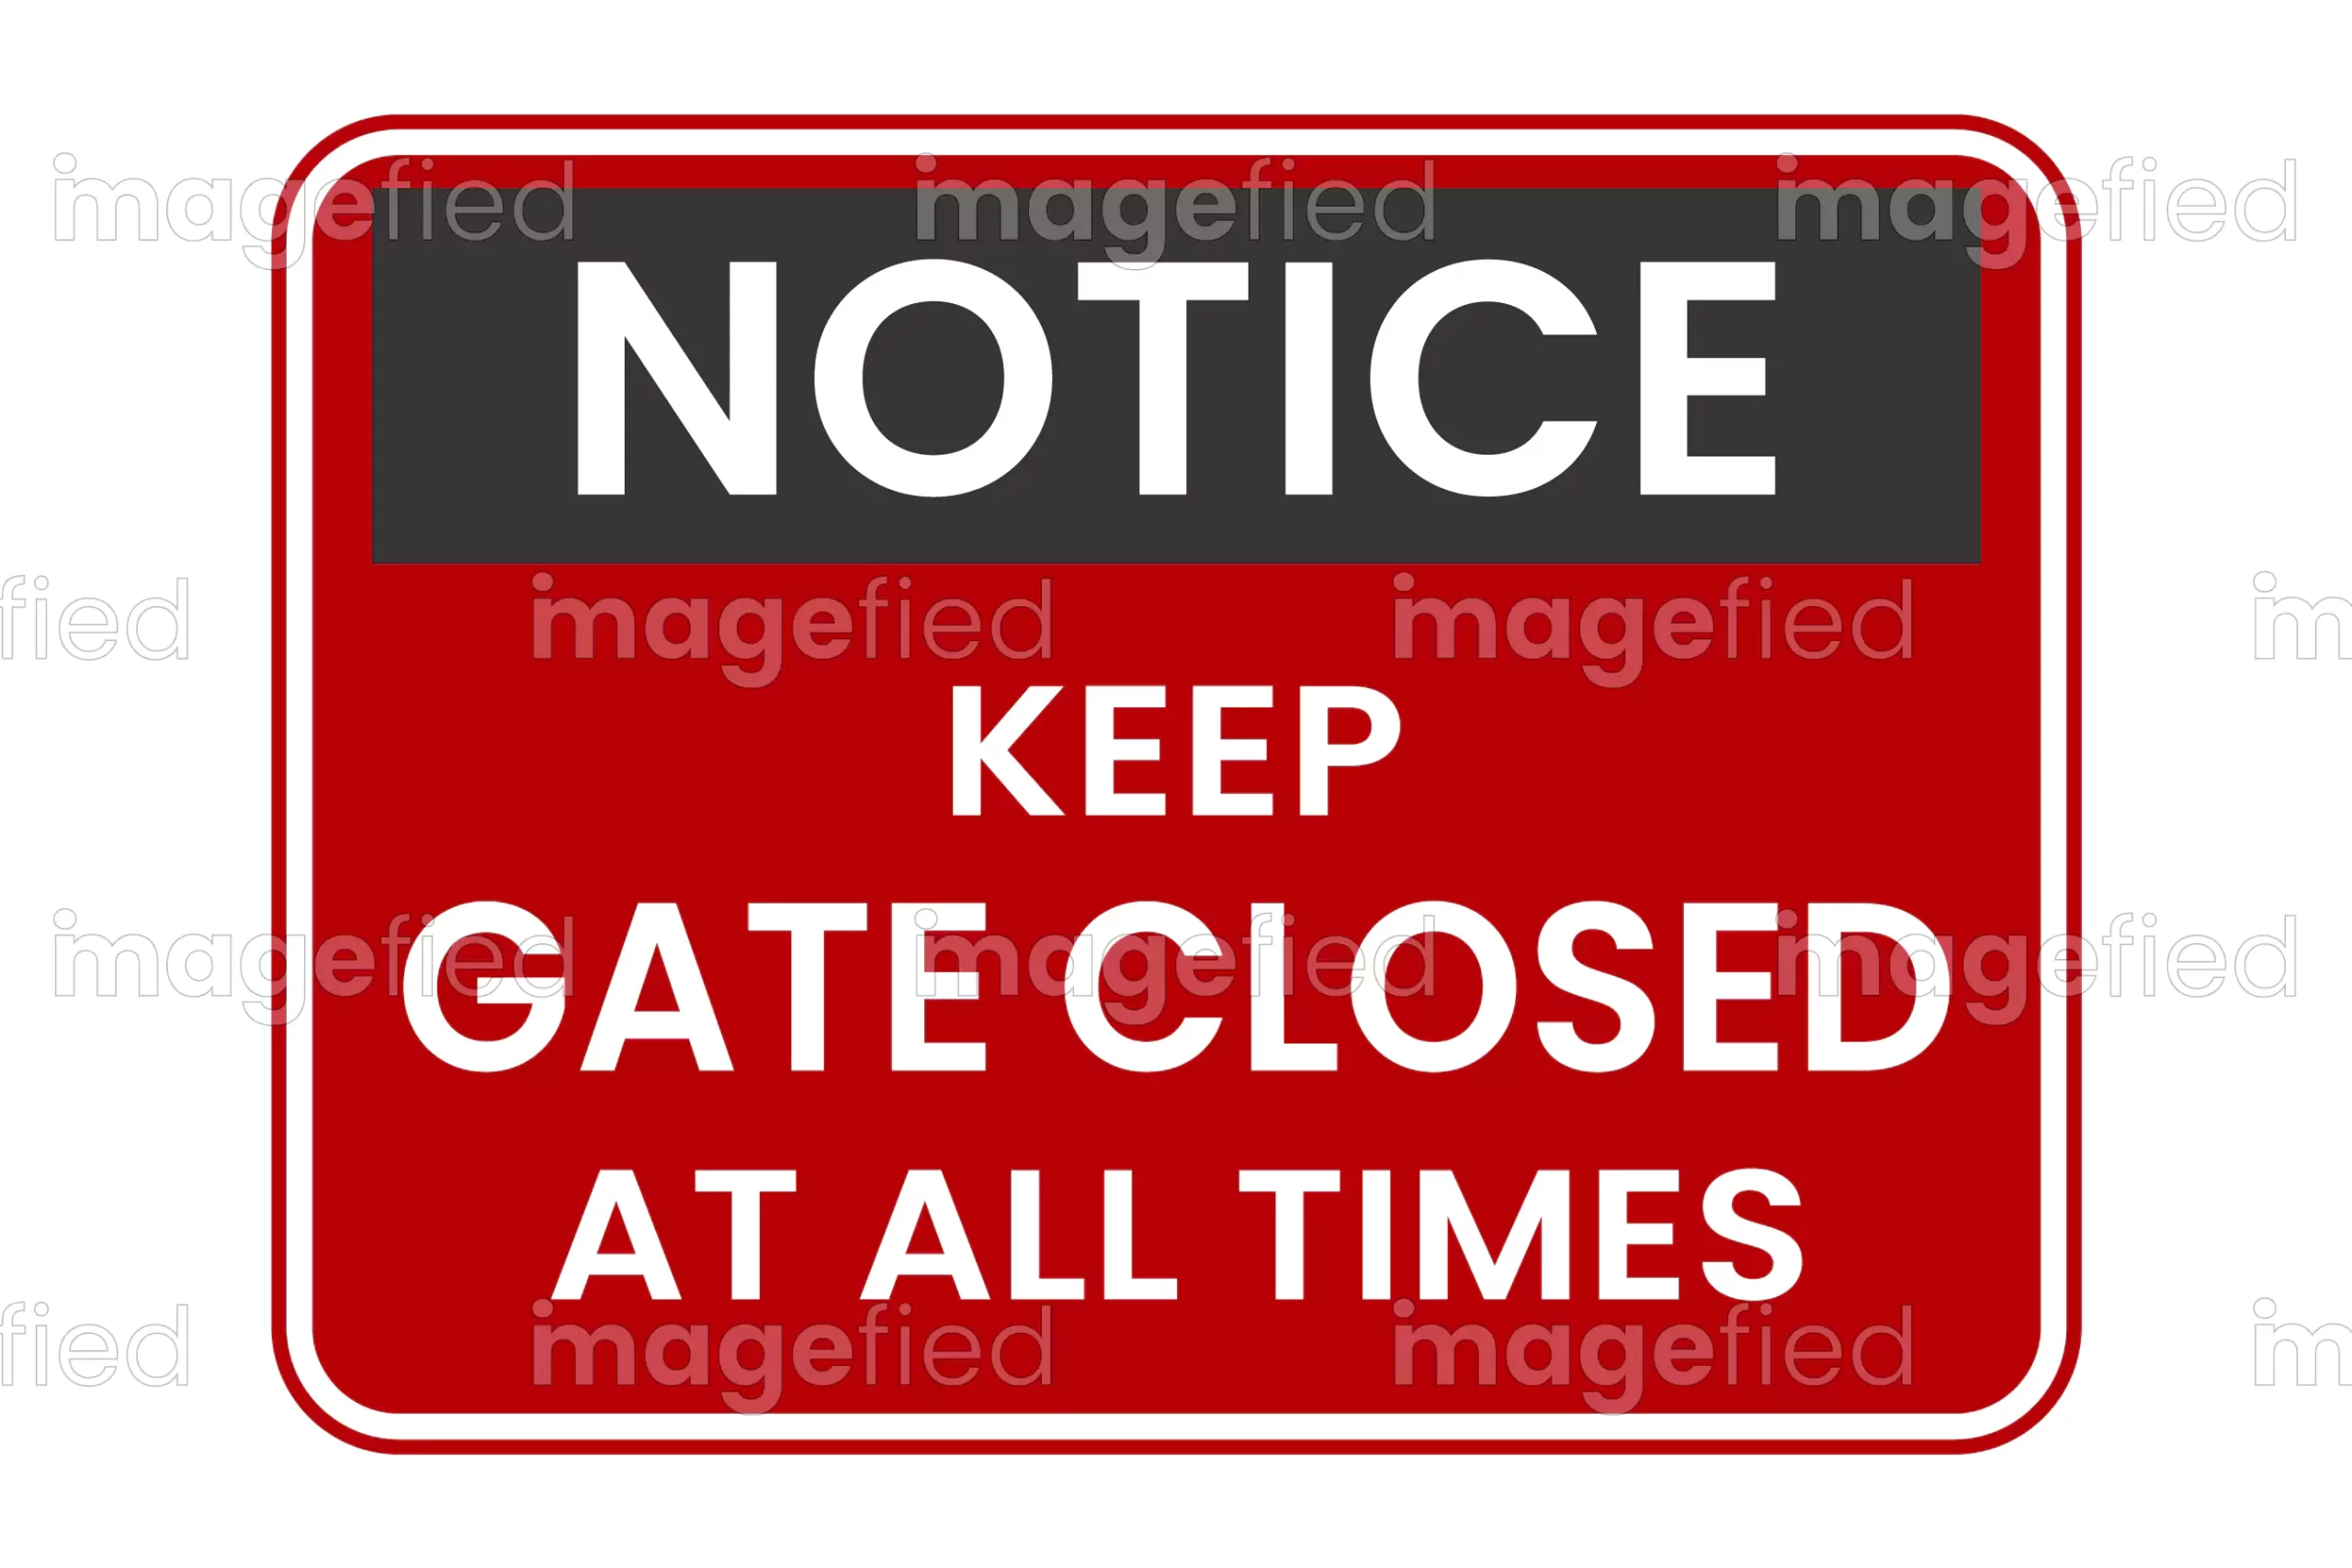 Keep gate closed at all times multicolor sign sticker printable